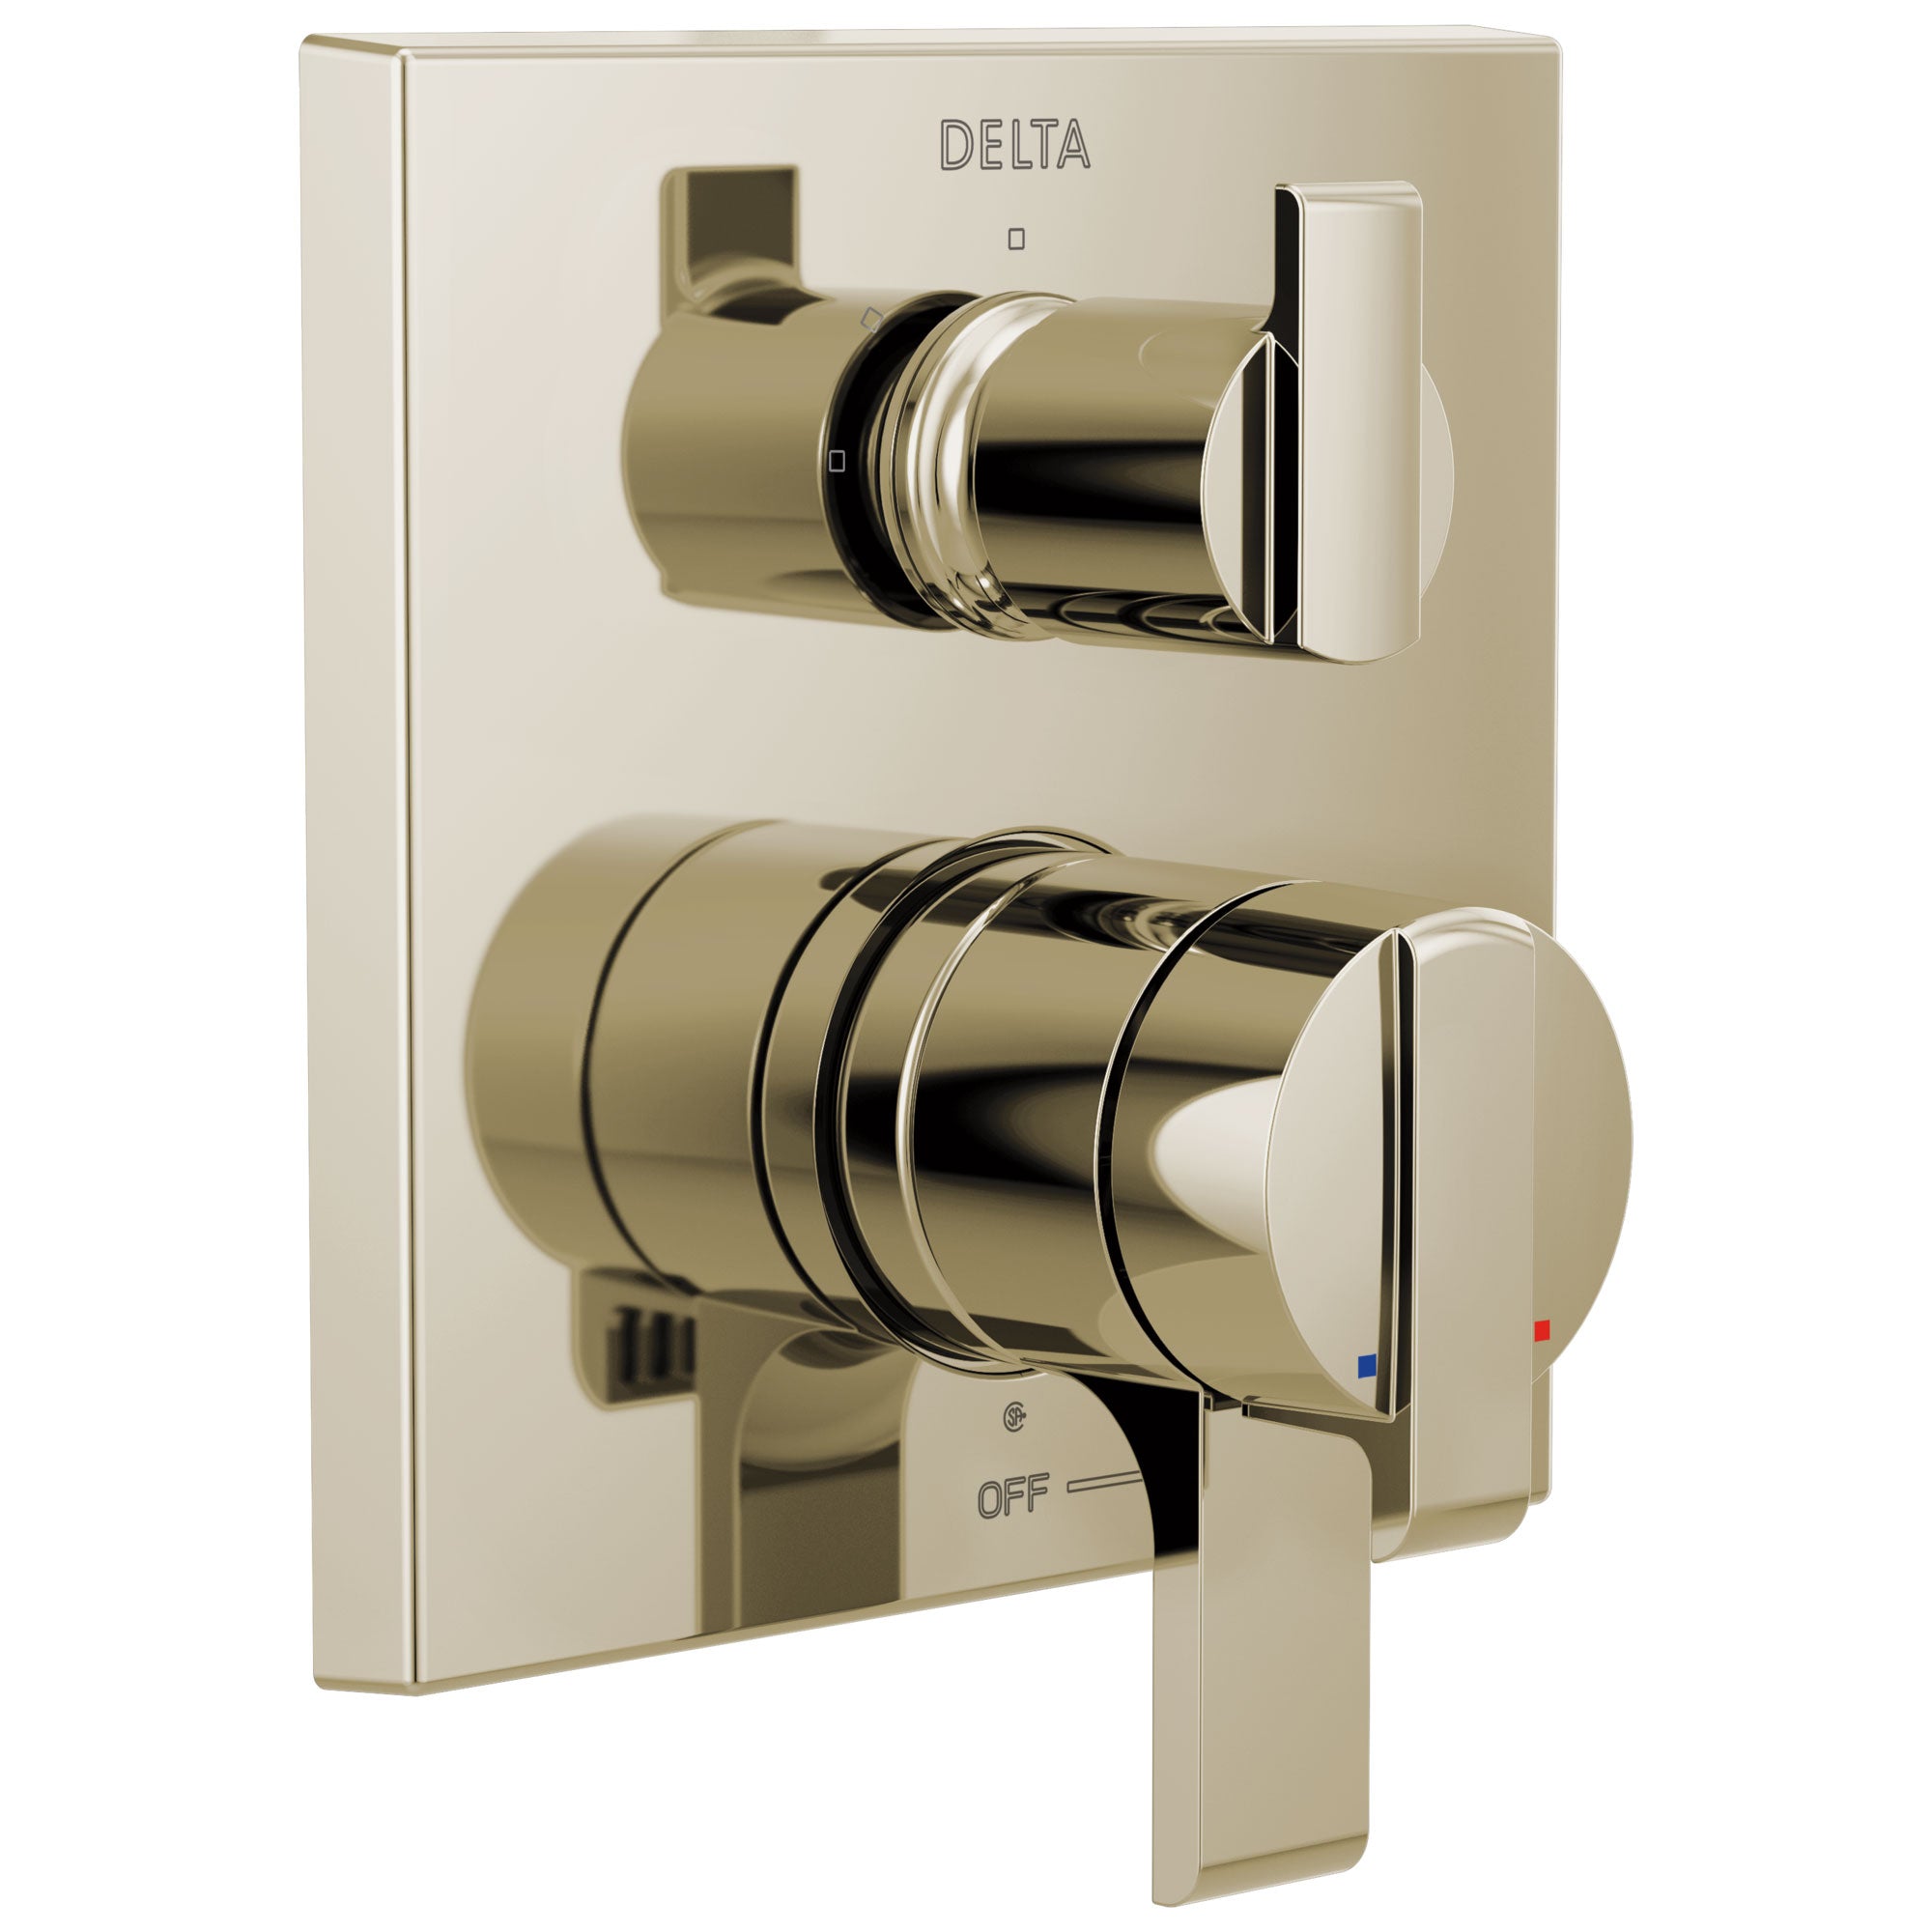 Delta Ara Polished Nickel Finish Angular Modern Monitor 17 Series Shower Control Trim Kit with 3-Setting Integrated Diverter (Requires Valve) DT27867PN